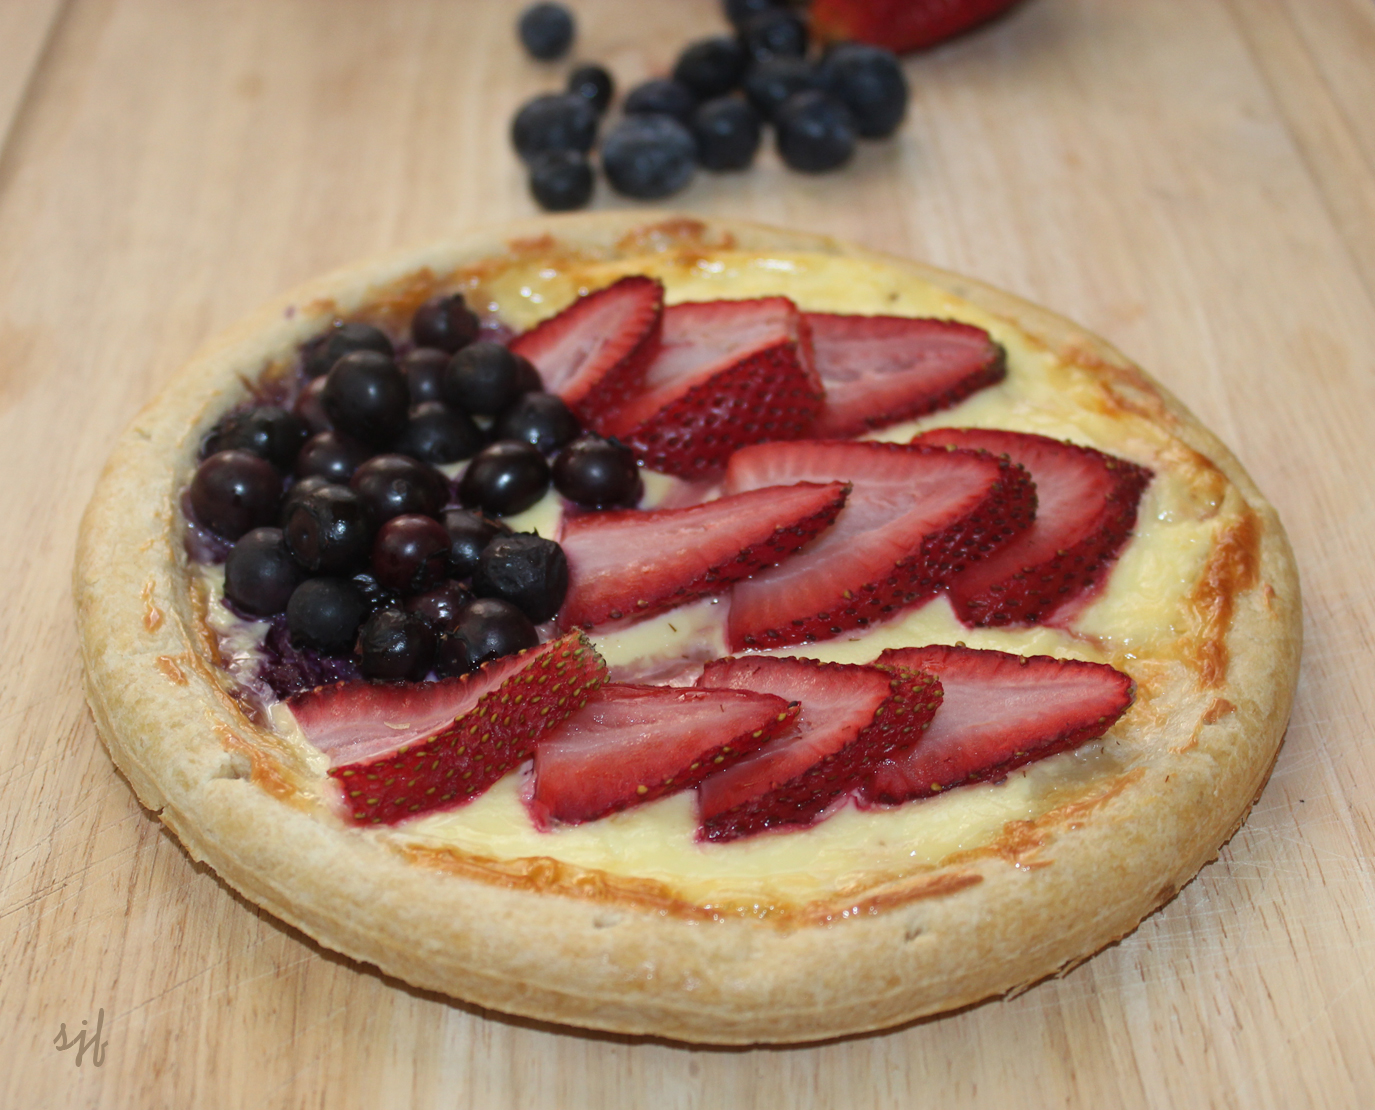 Dessert Pizza with Brie, Blueberries & Strawberries | Eatright Art